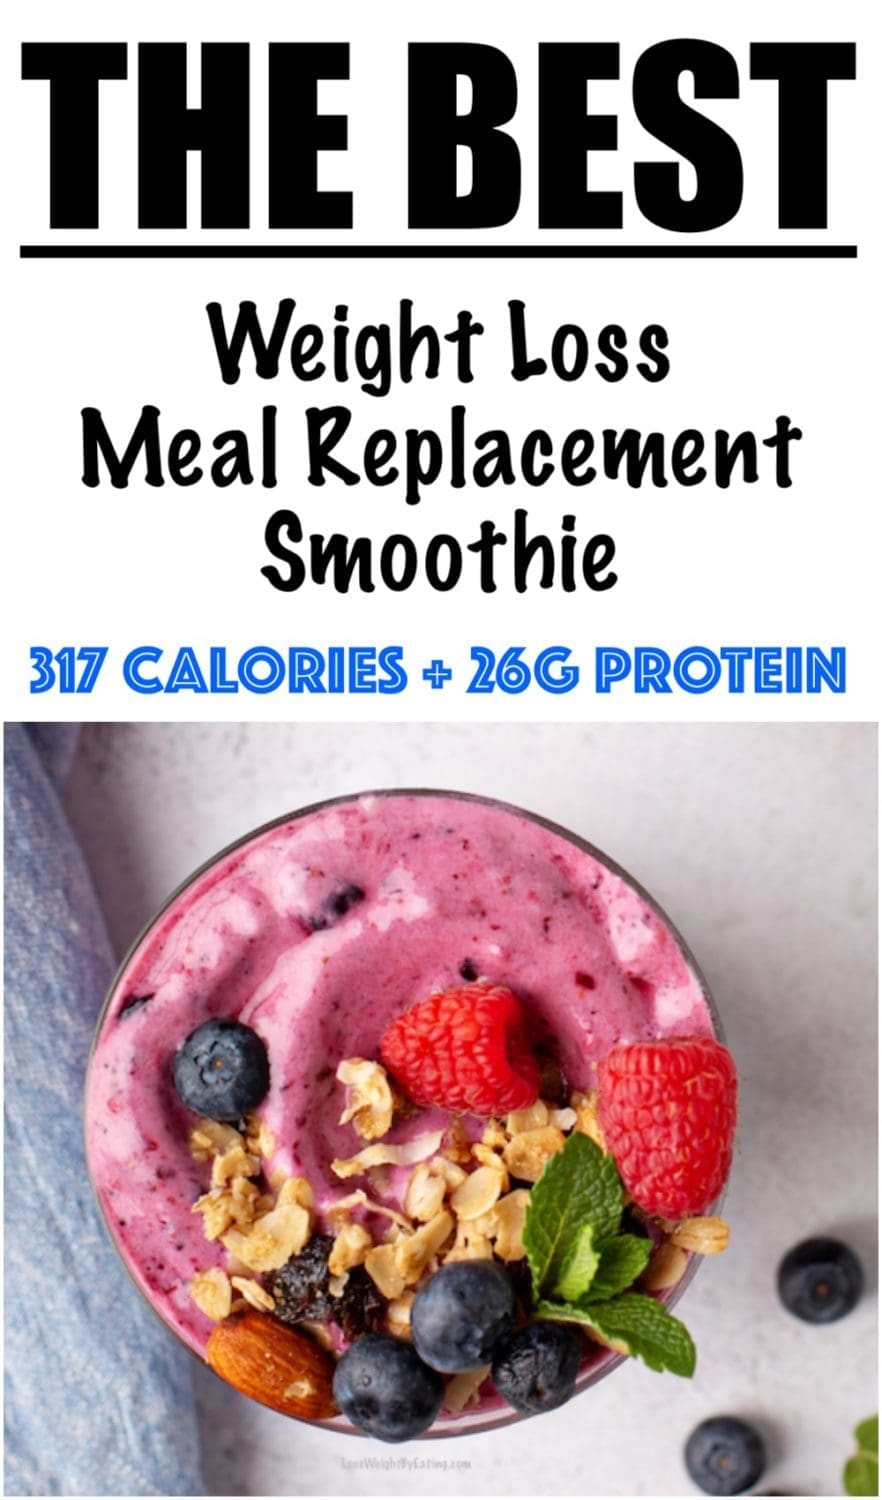 Weight Loss Meal Replacement Smoothie Recipe